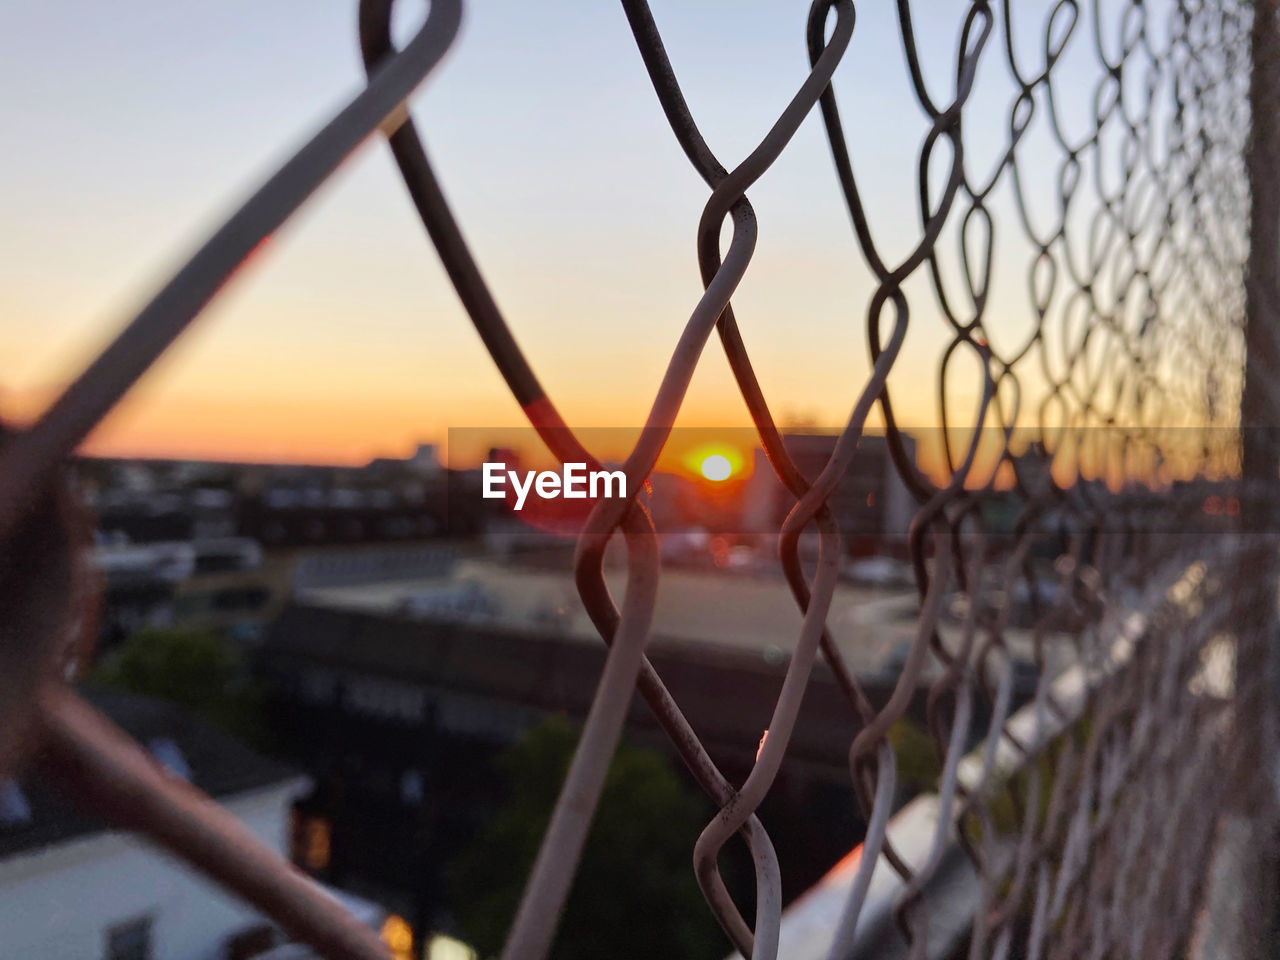 CLOSE-UP OF CHAINLINK FENCE AT SUNSET